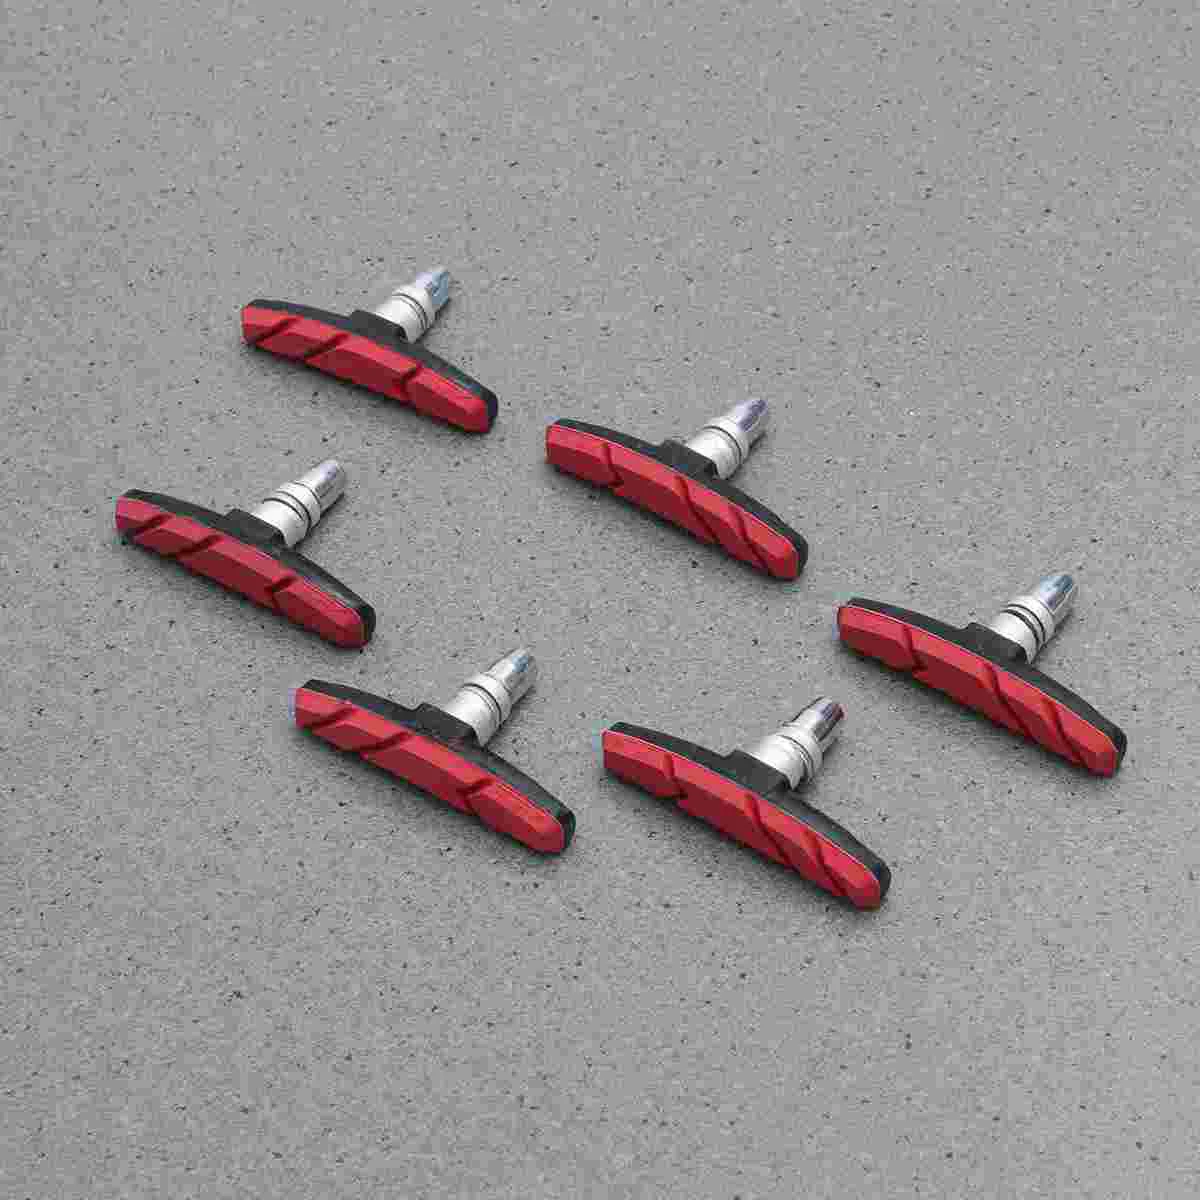 

3 Pairs of Mountain Road Cycling Bike V Brake Pads Braking Shoes Blocks Cycling Accessories for MTB V-brake System (Red)